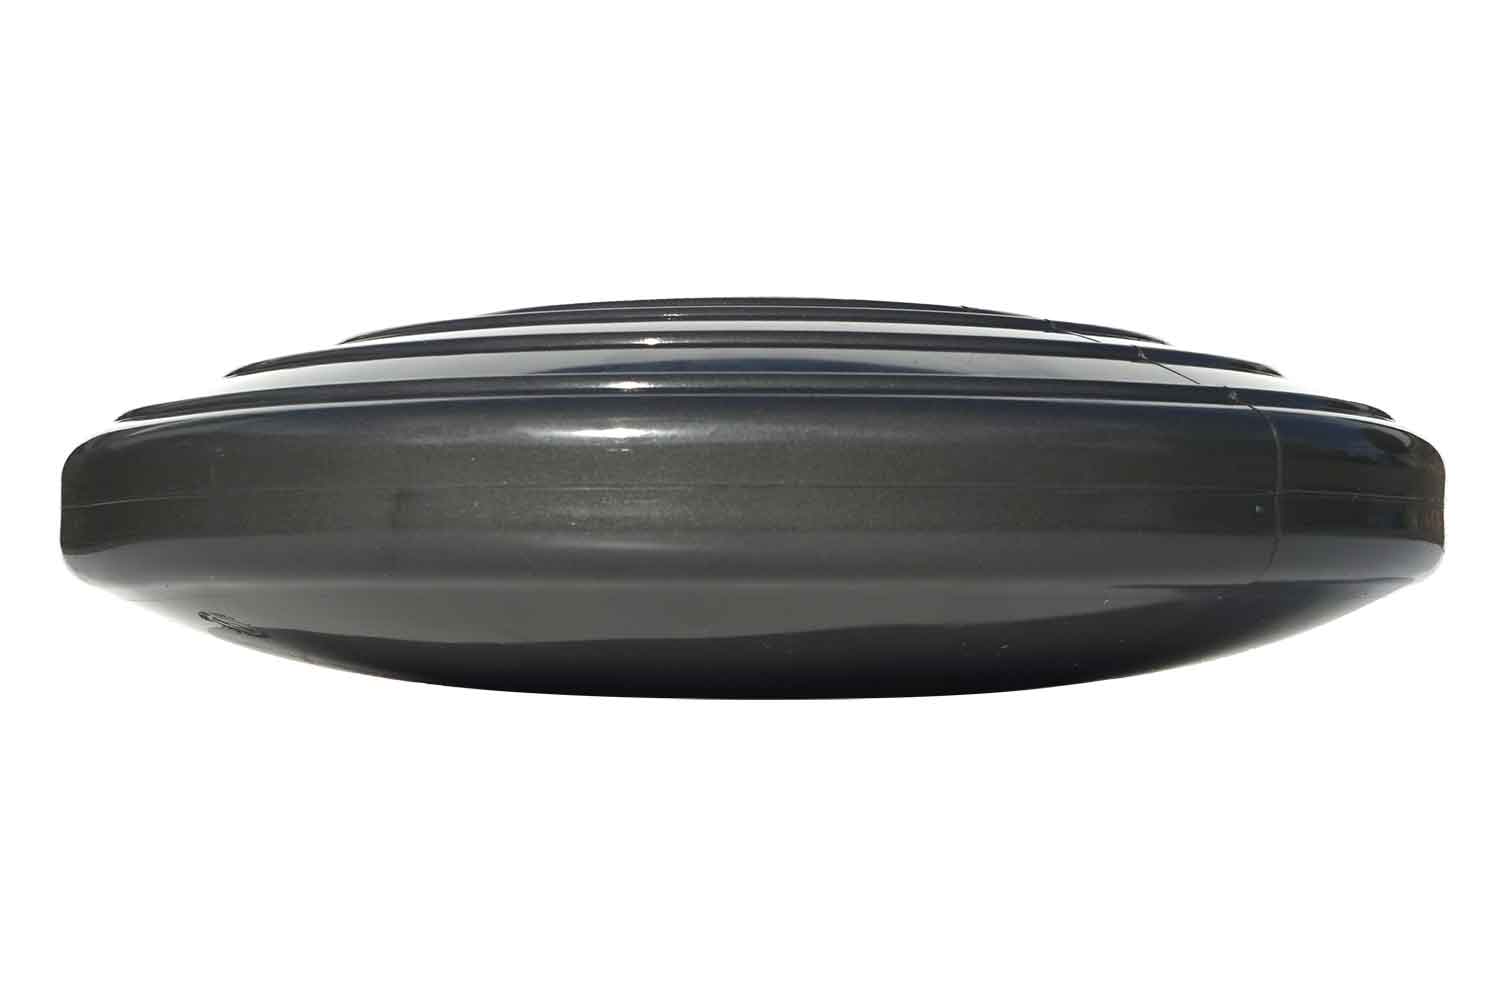 Easy Start Balance Disc, 40 cm, for CoolBoard wobble board, shown from side, medium inflation